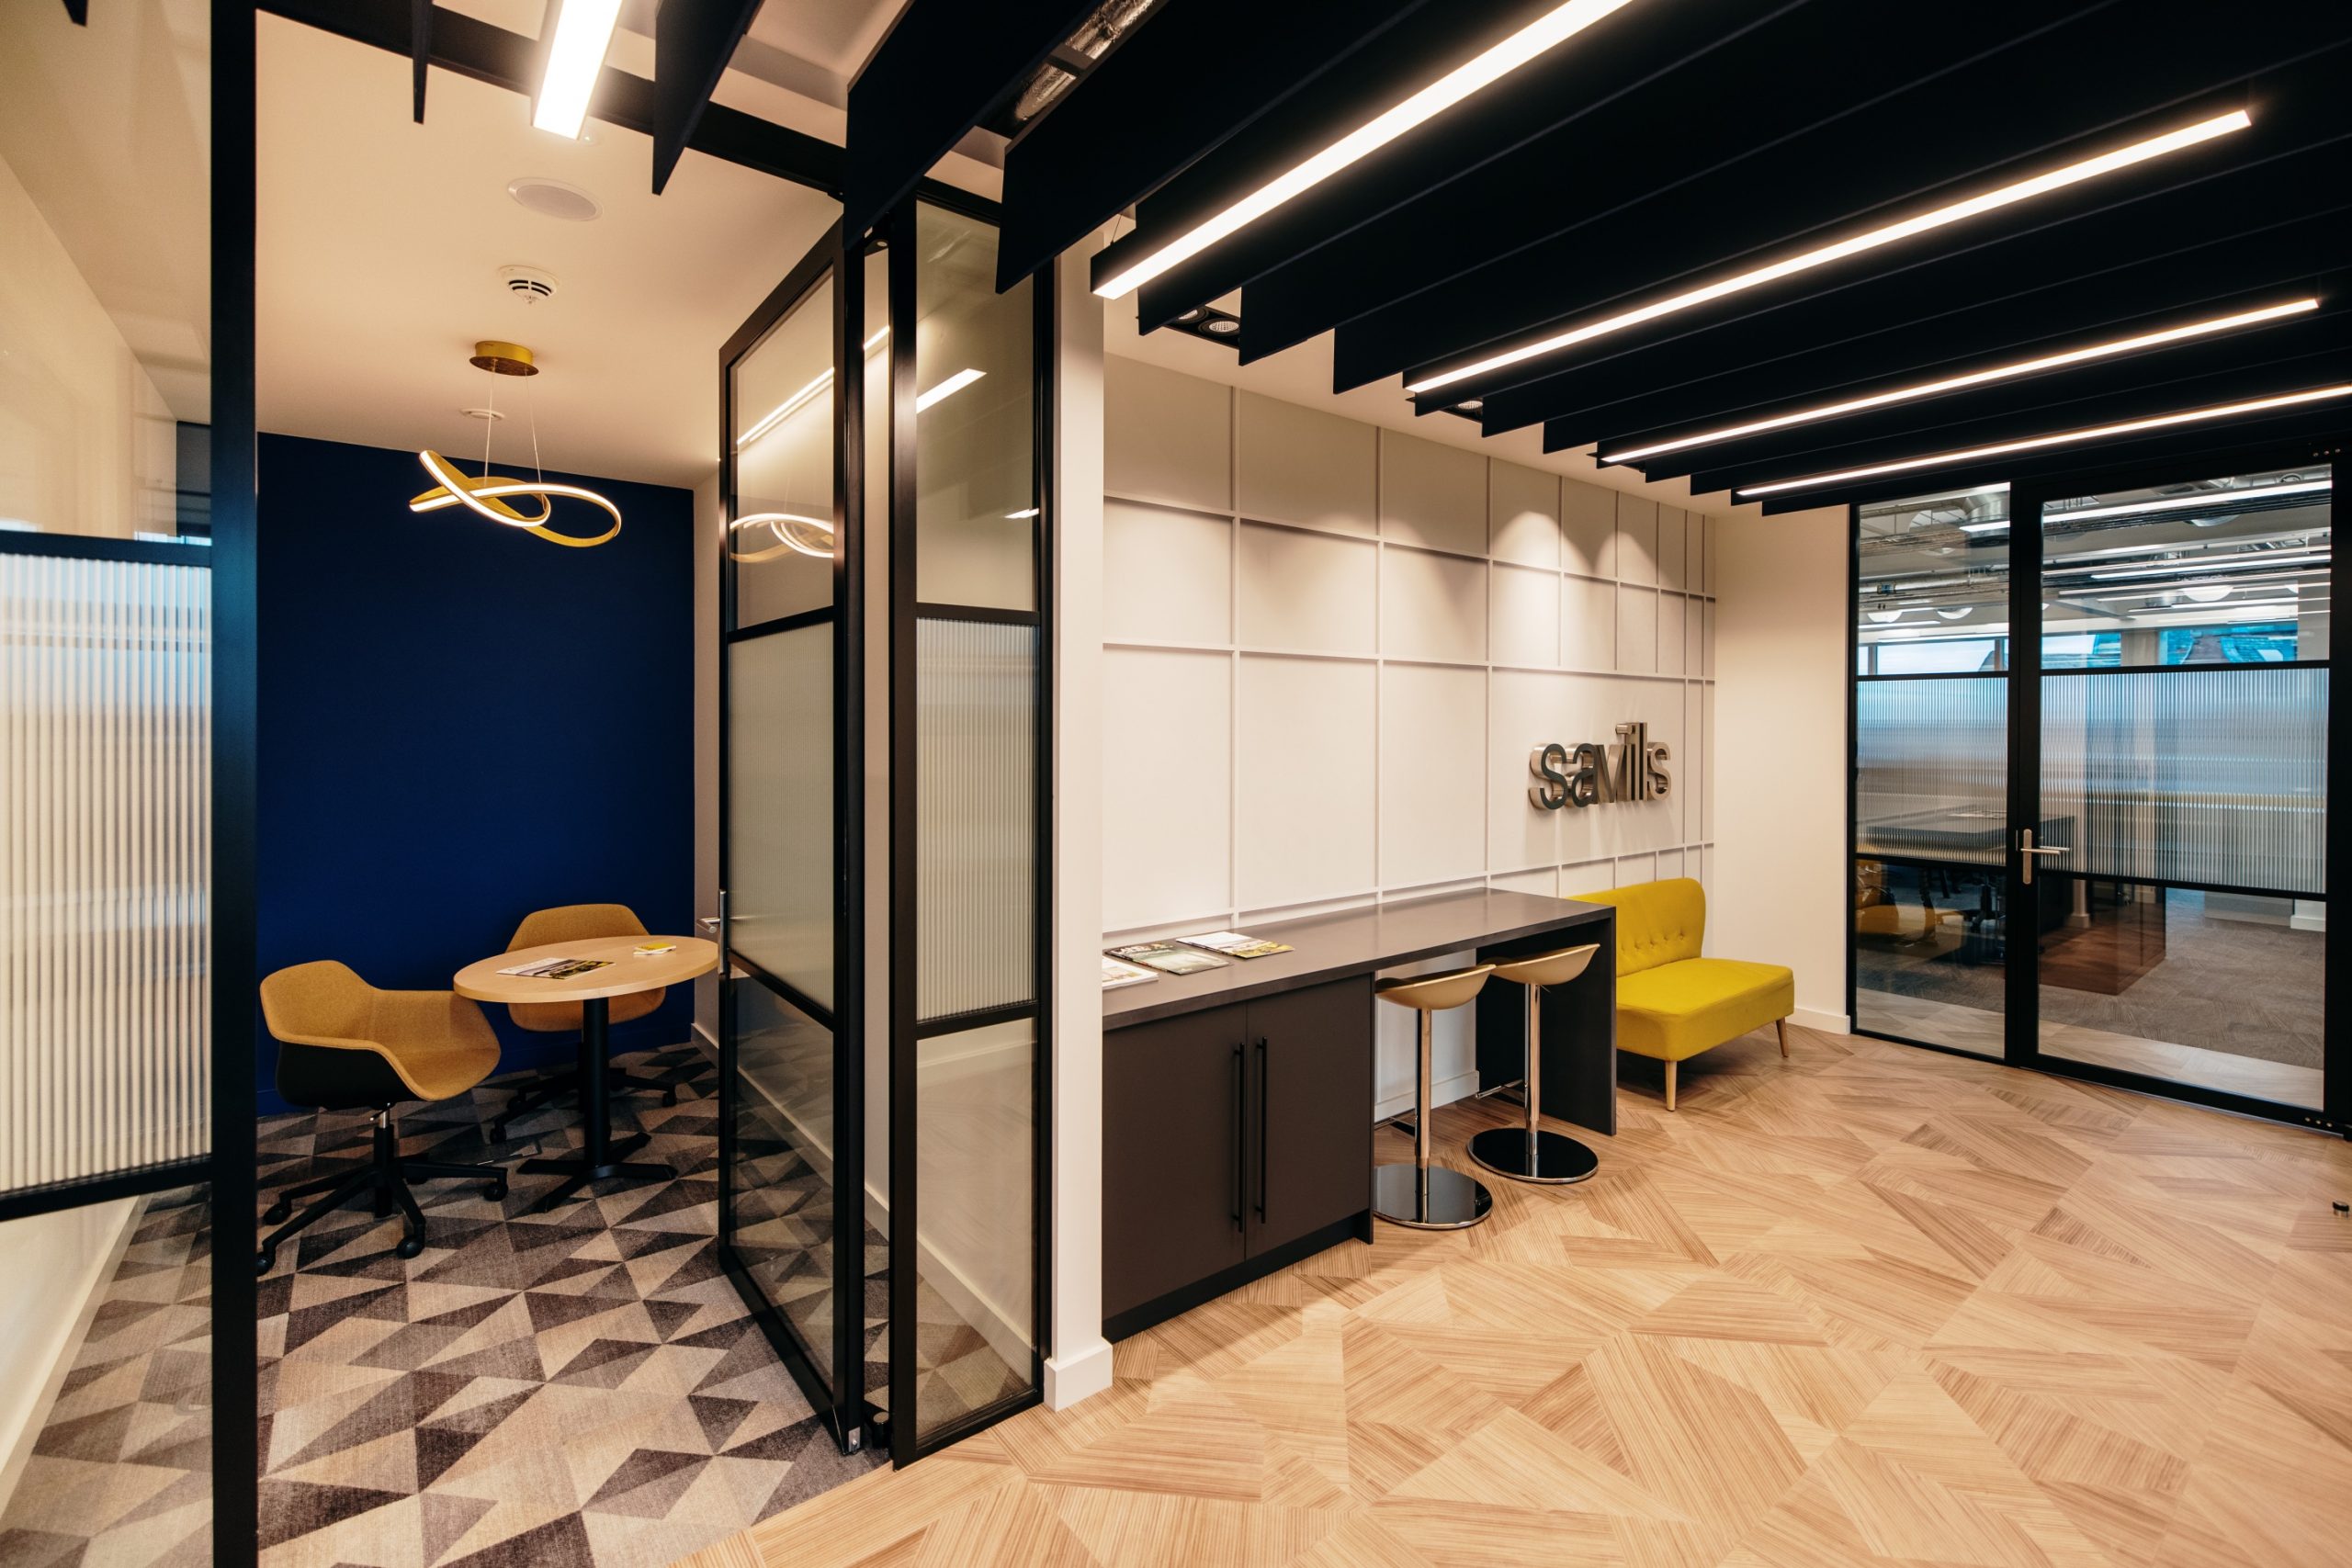 Meeting booths, lounge areas and quiet rooms: Savills’ new office fit-out completes @chameleonbusint